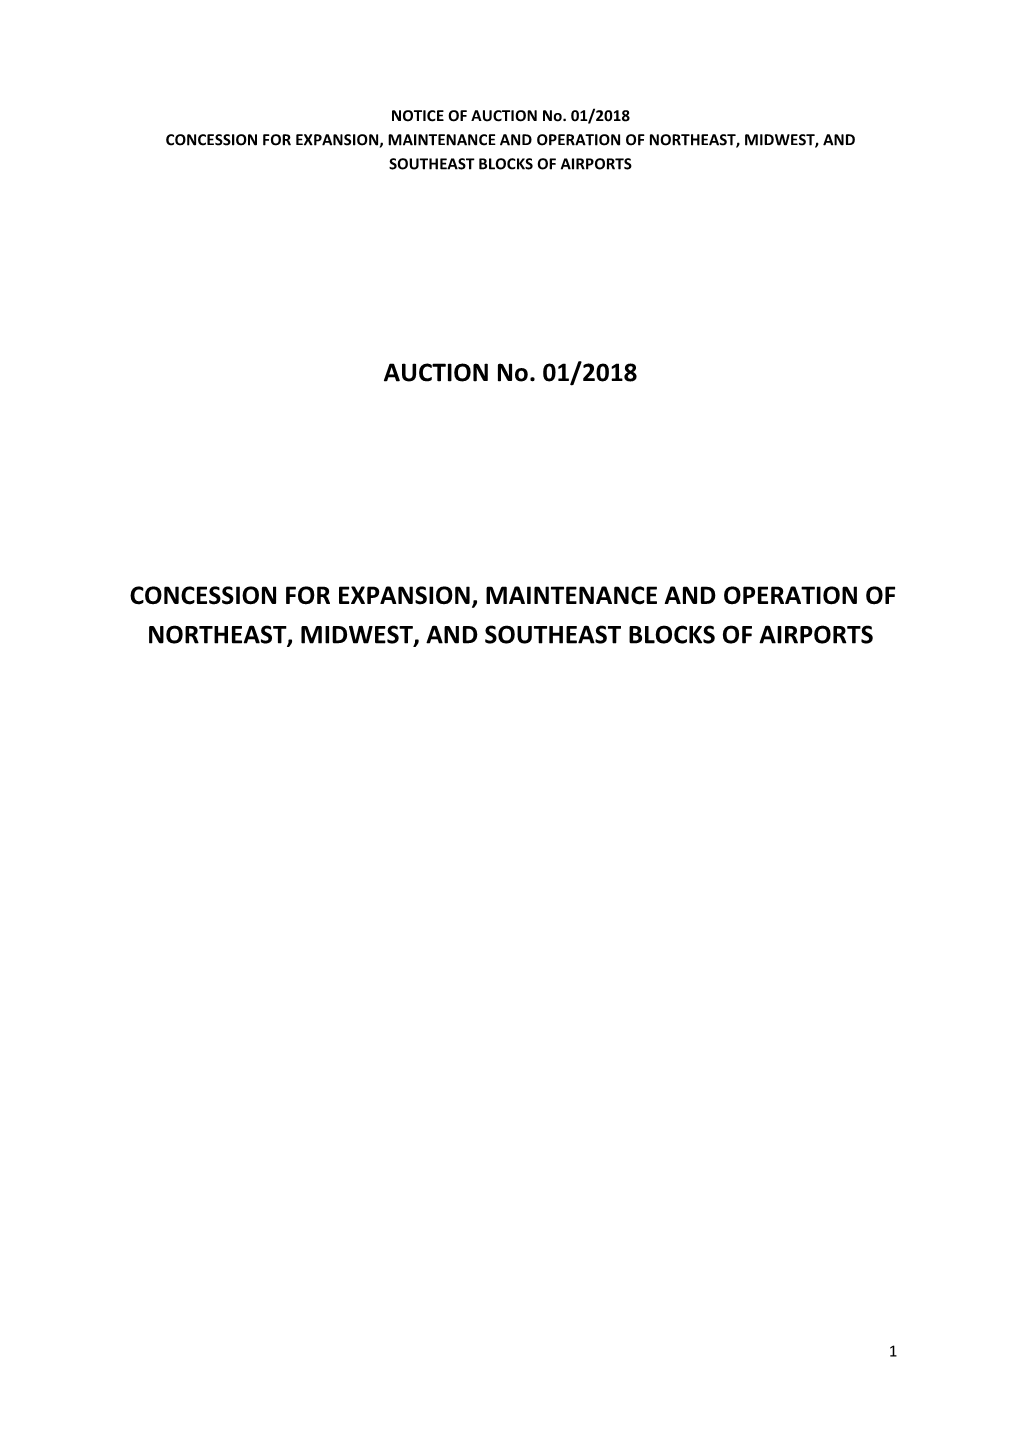 AUCTION No. 01/2018 CONCESSION for EXPANSION, MAINTENANCE and OPERATION of NORTHEAST, MIDWEST, and SOUTHEAST BLOCKS of AIRPORTS